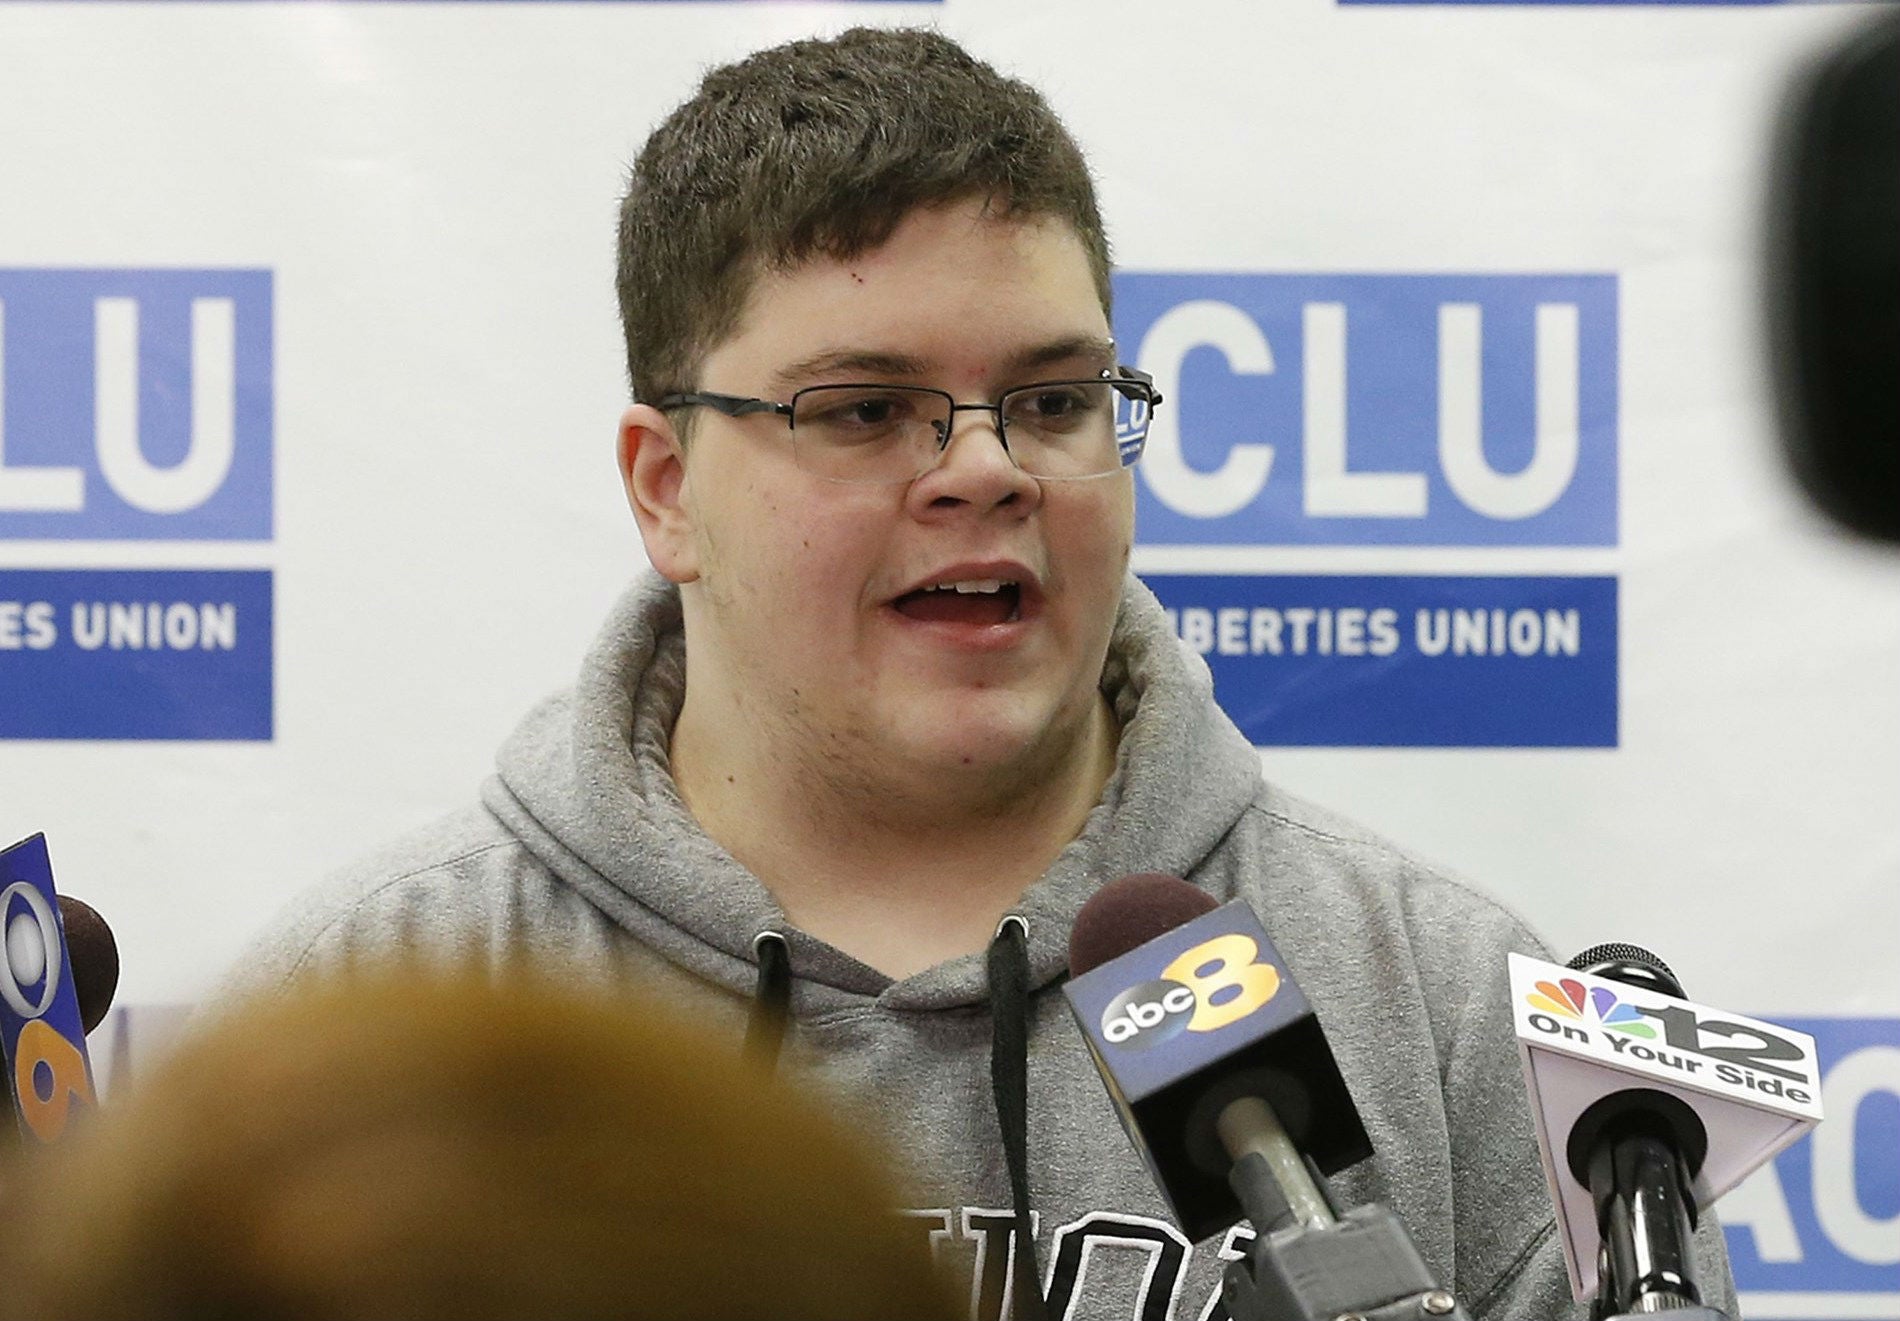 Gavin Grimm, 22, won his lawsuit against the Gloucester County School Board